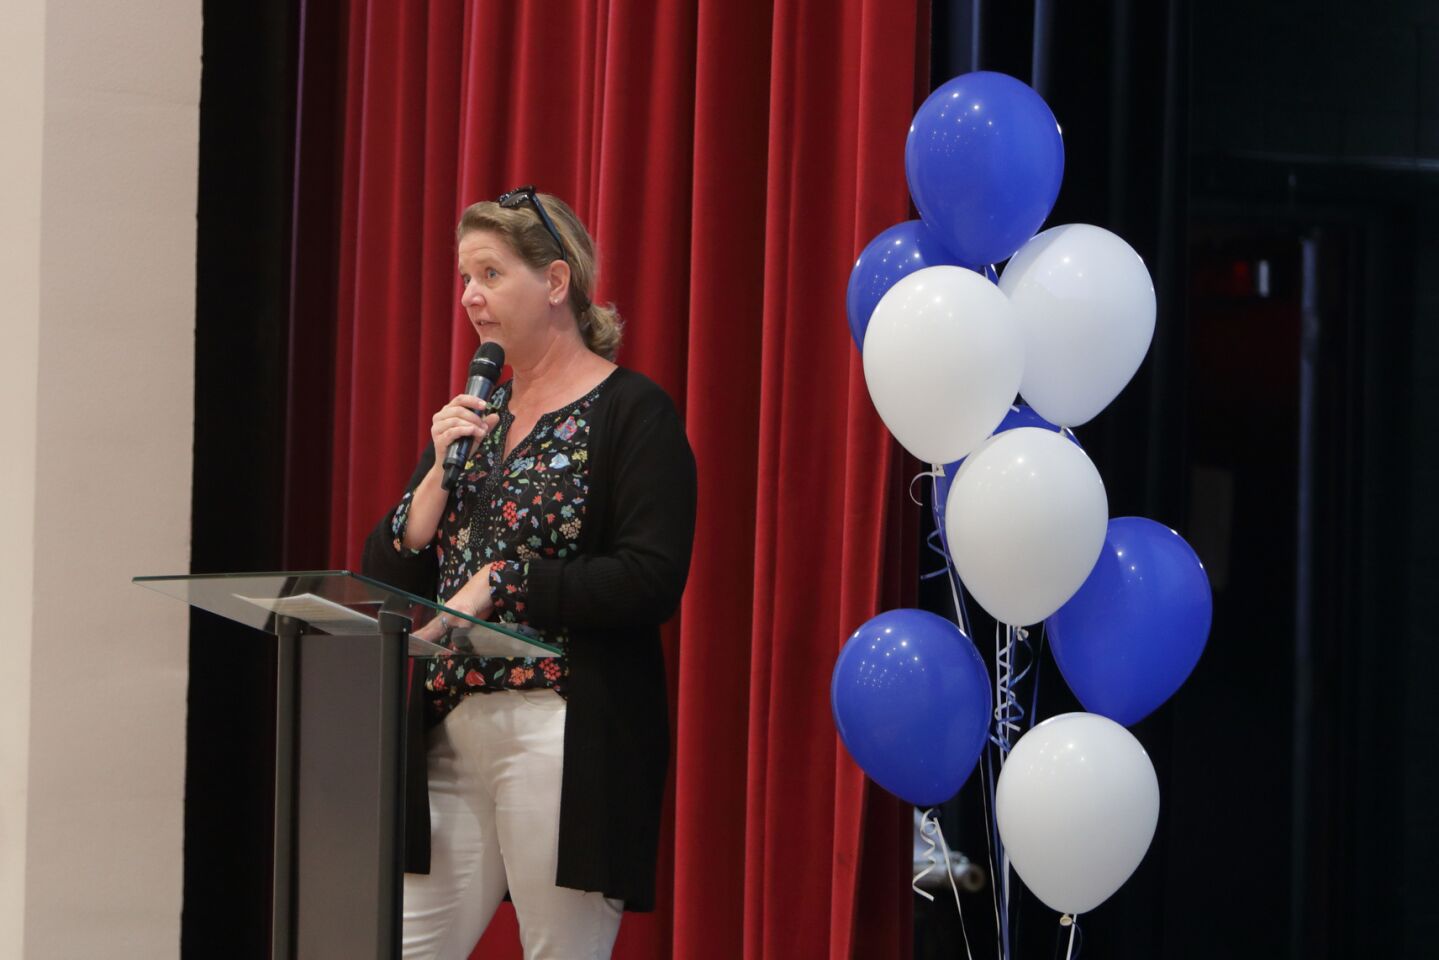 TVIA-SD2 President Jennifer Raysman welcomes students and parents